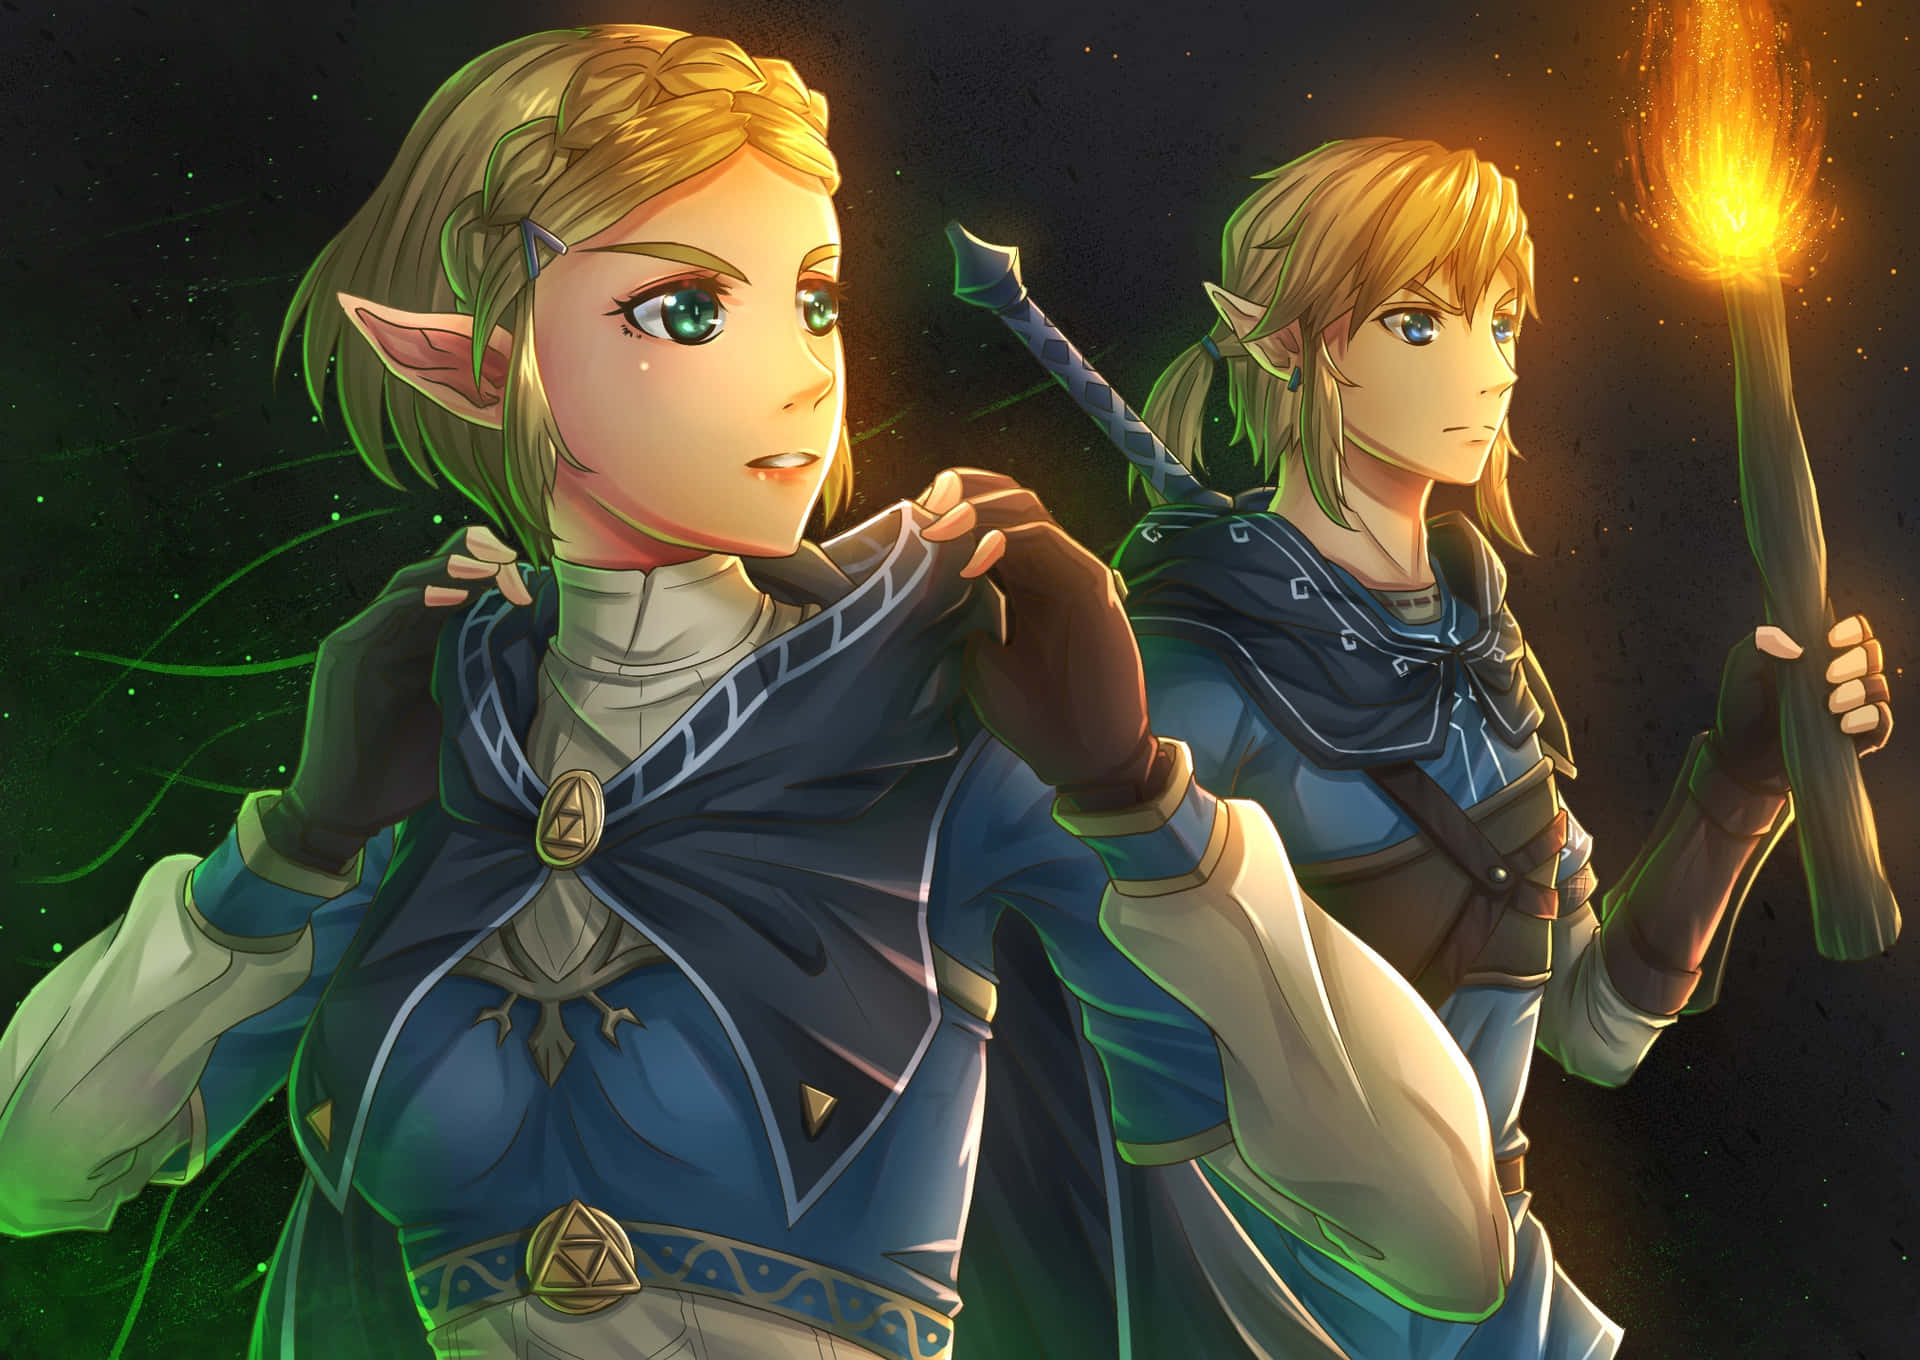 100+] The Legend Of Zelda Tears Of The Kingdom Wallpapers for FREE